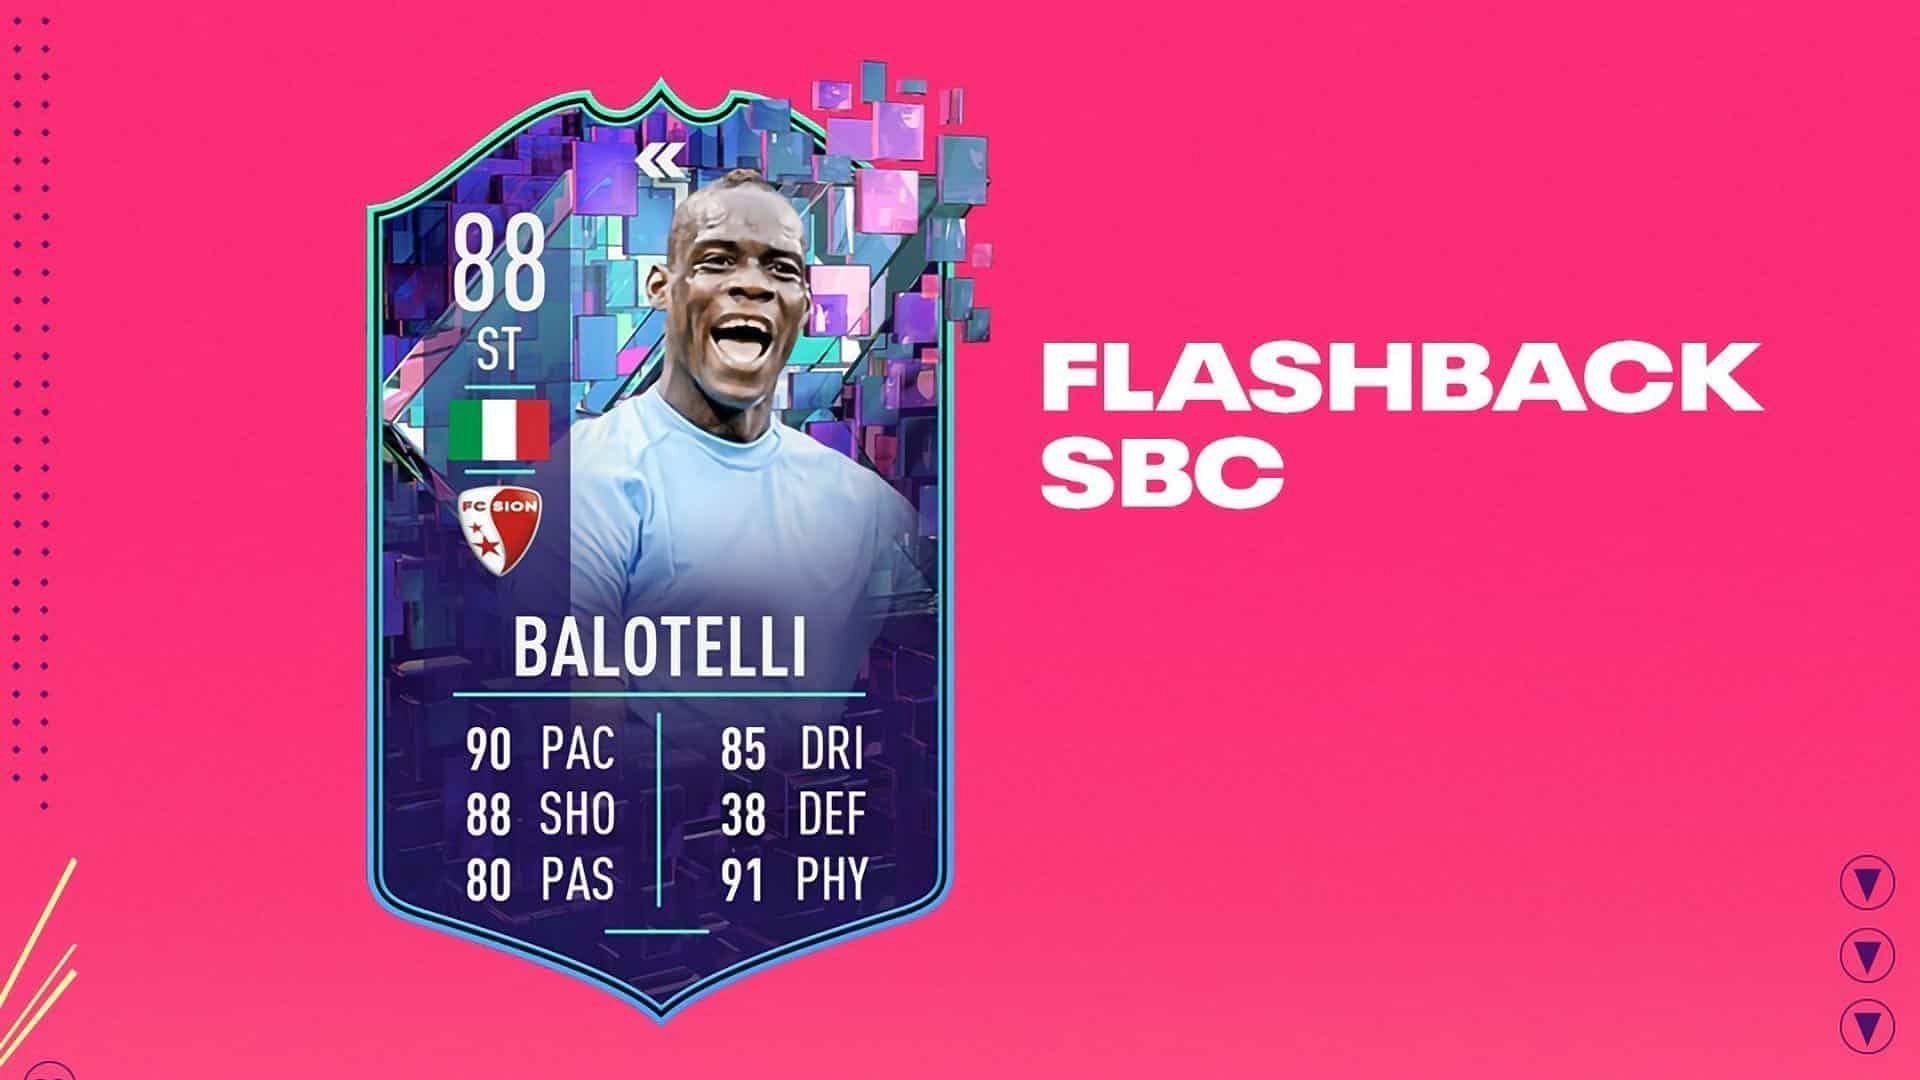 FIFA 23 players can earn an interesting card by completing the Mario Balotelli Flashback SBC (Image via EA Sports)